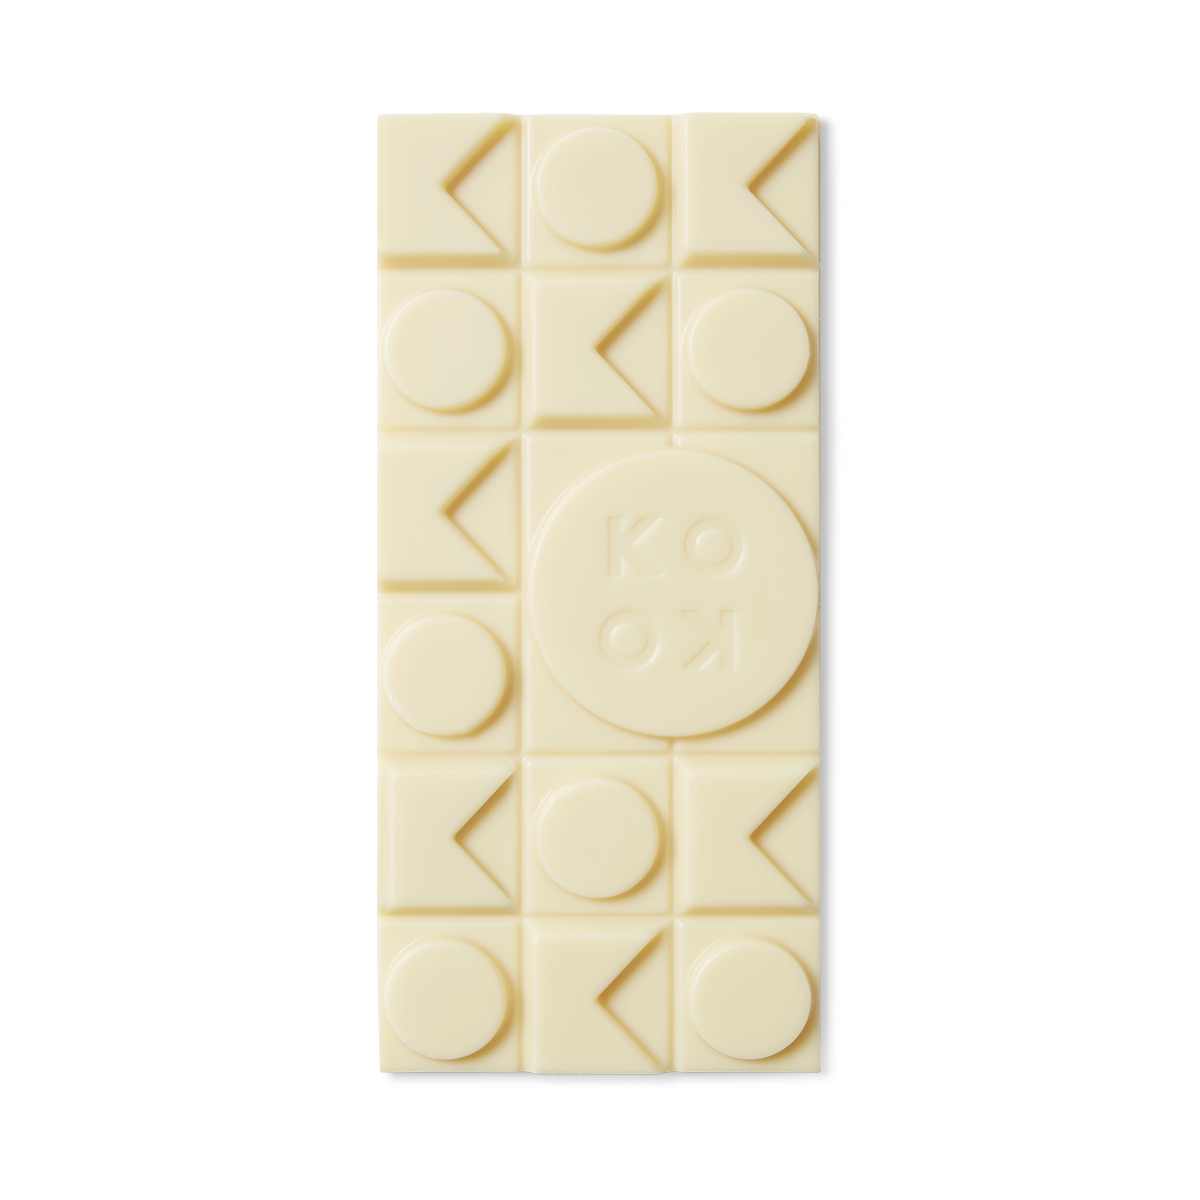 Exposed white chocolate block with art deco shaped pieces